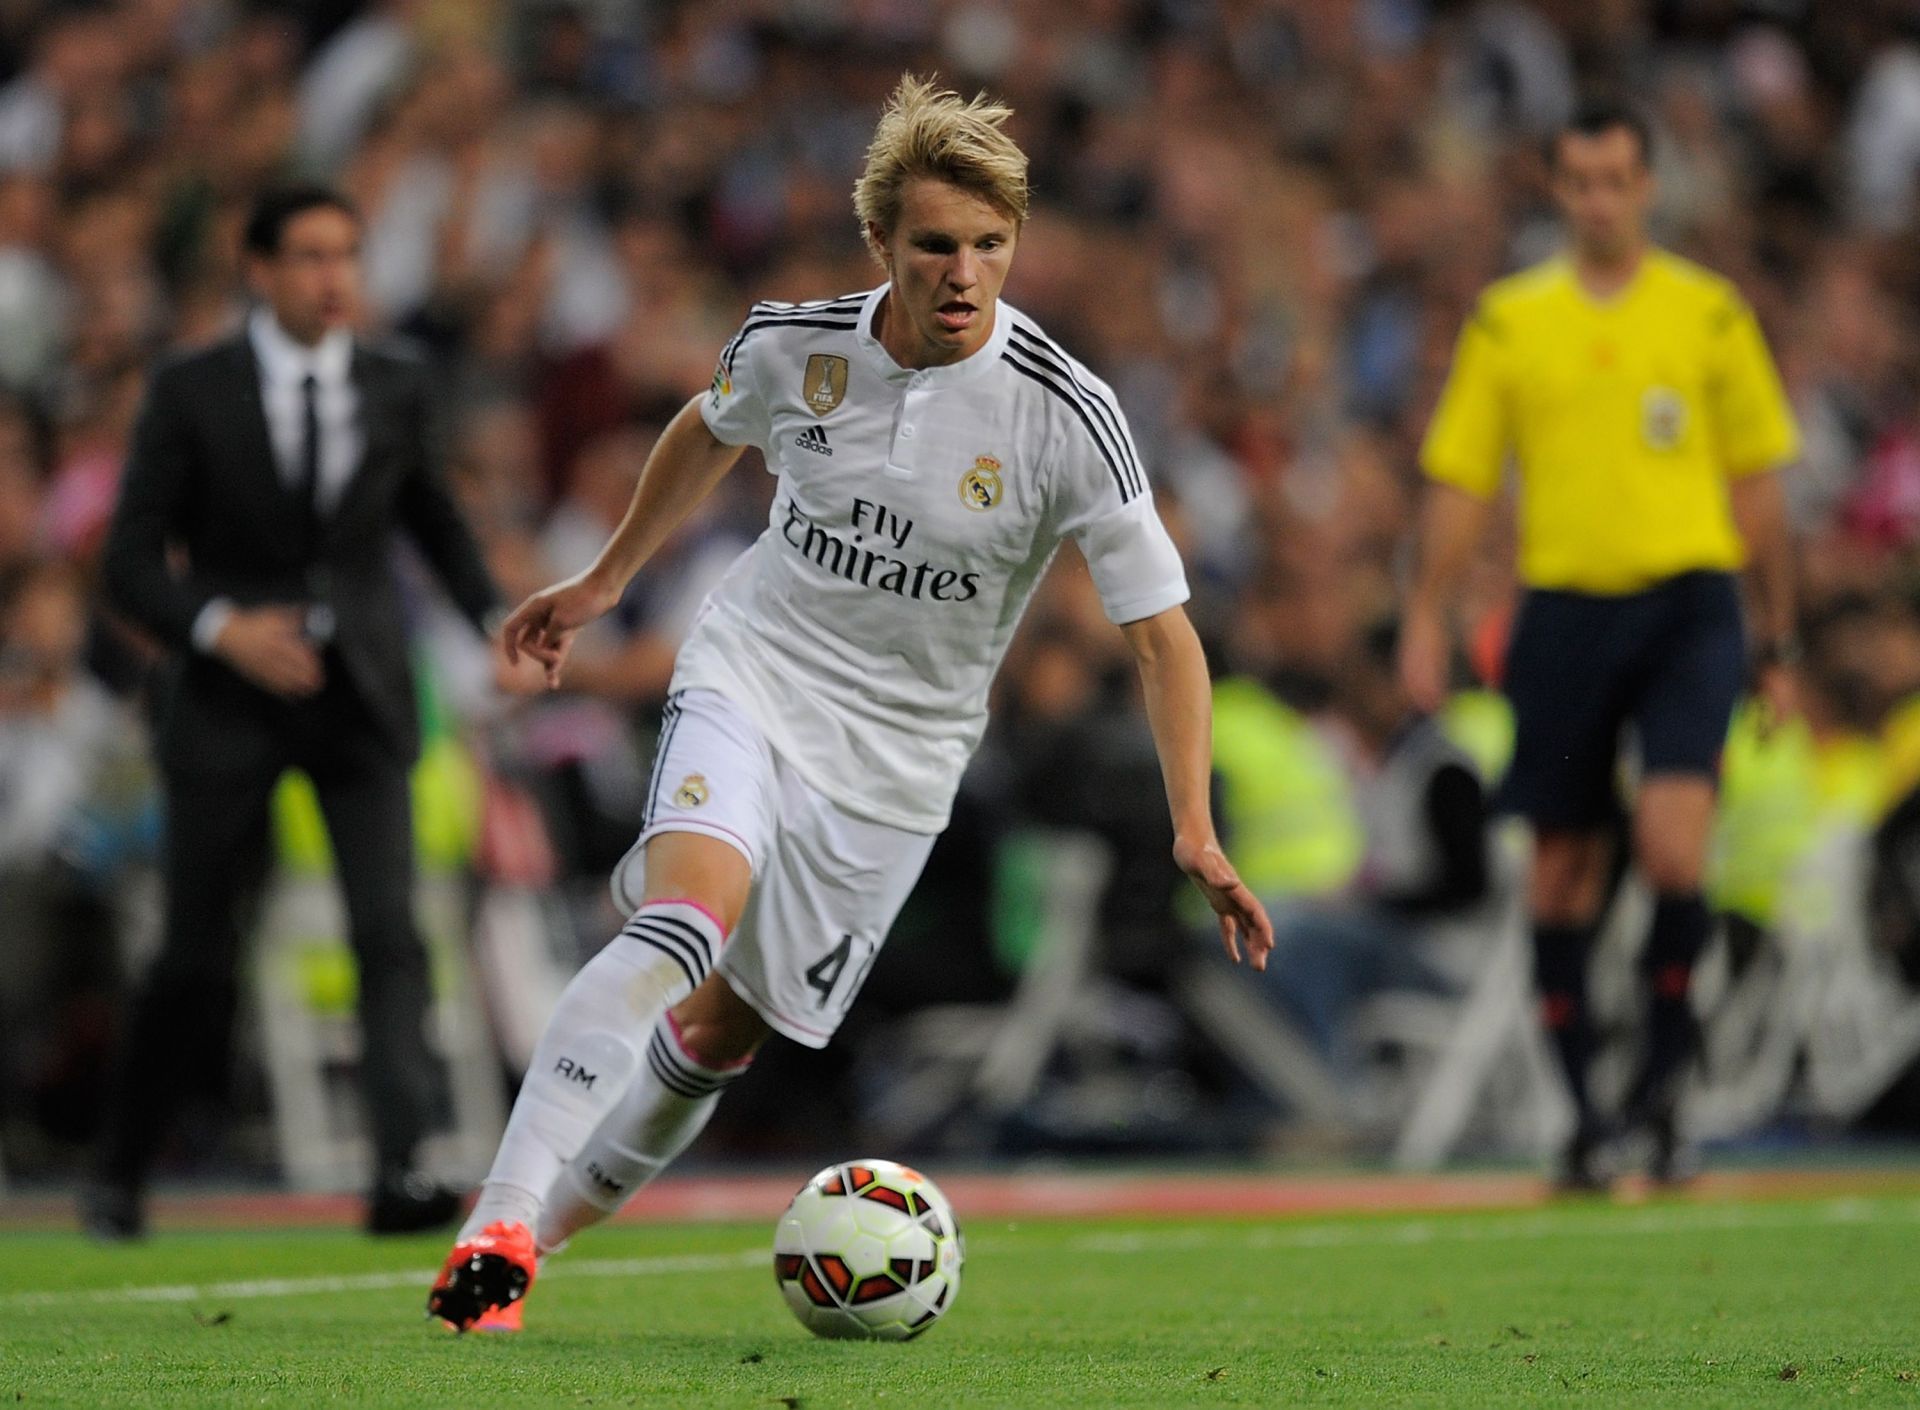 Odegaard came off the bench after the hour mark to replace the great Cristiano Ronaldo